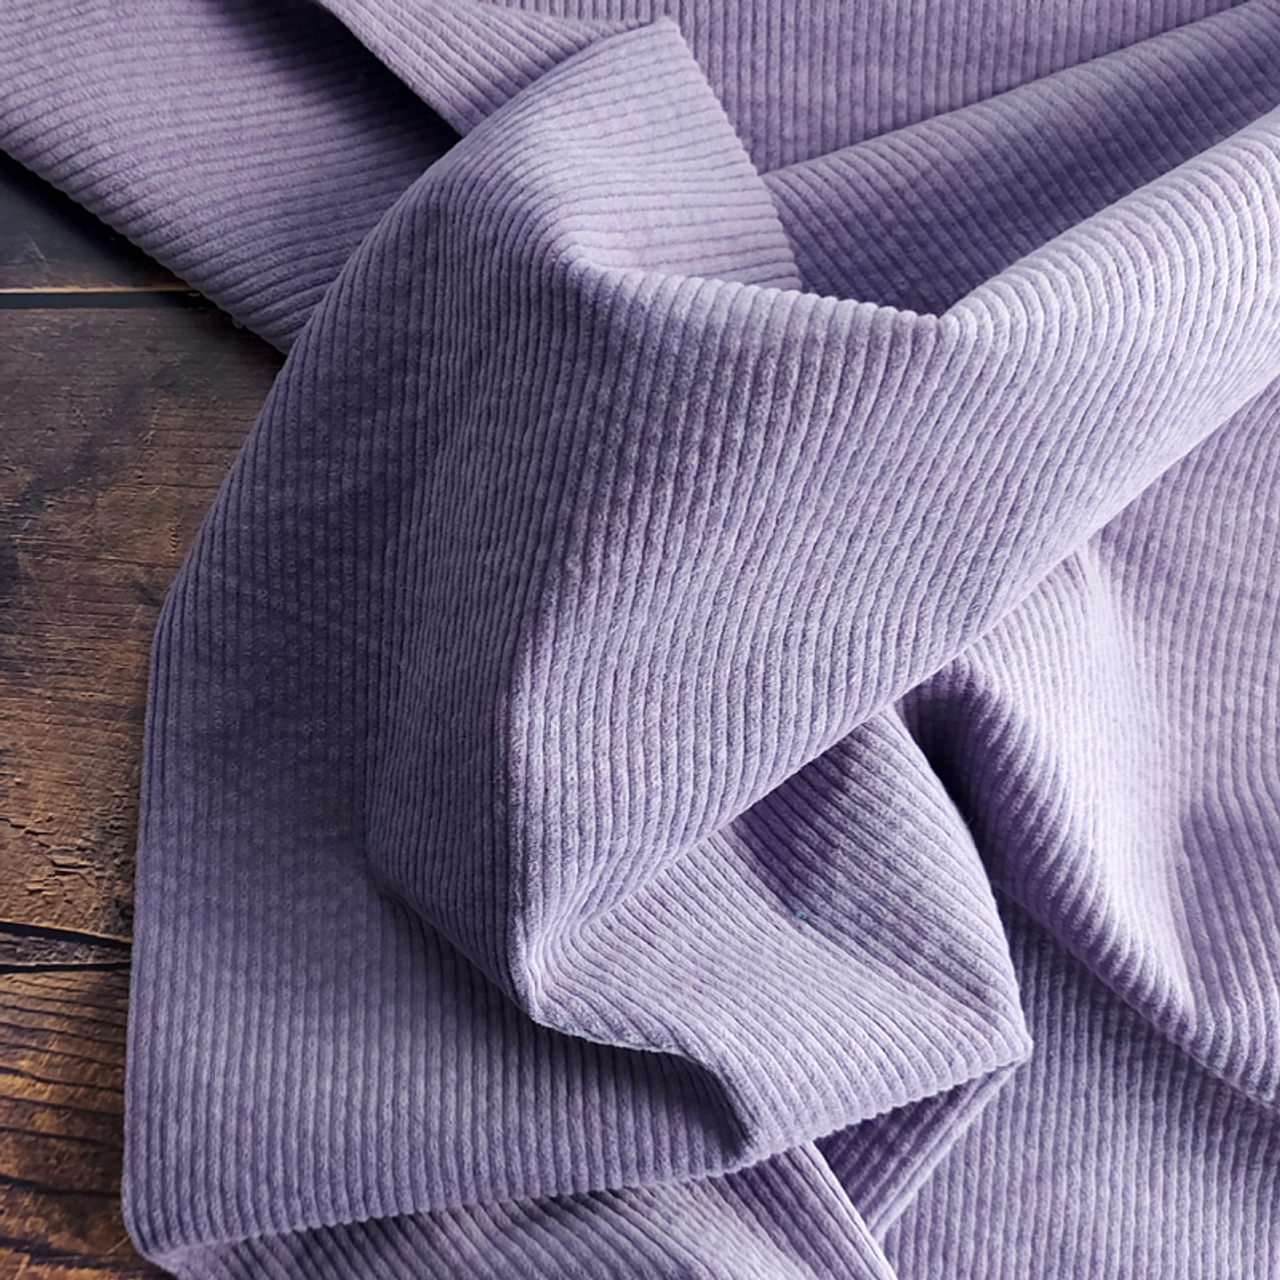 Stretch, woven, washed cotton corduroy fabric in beautiful colours